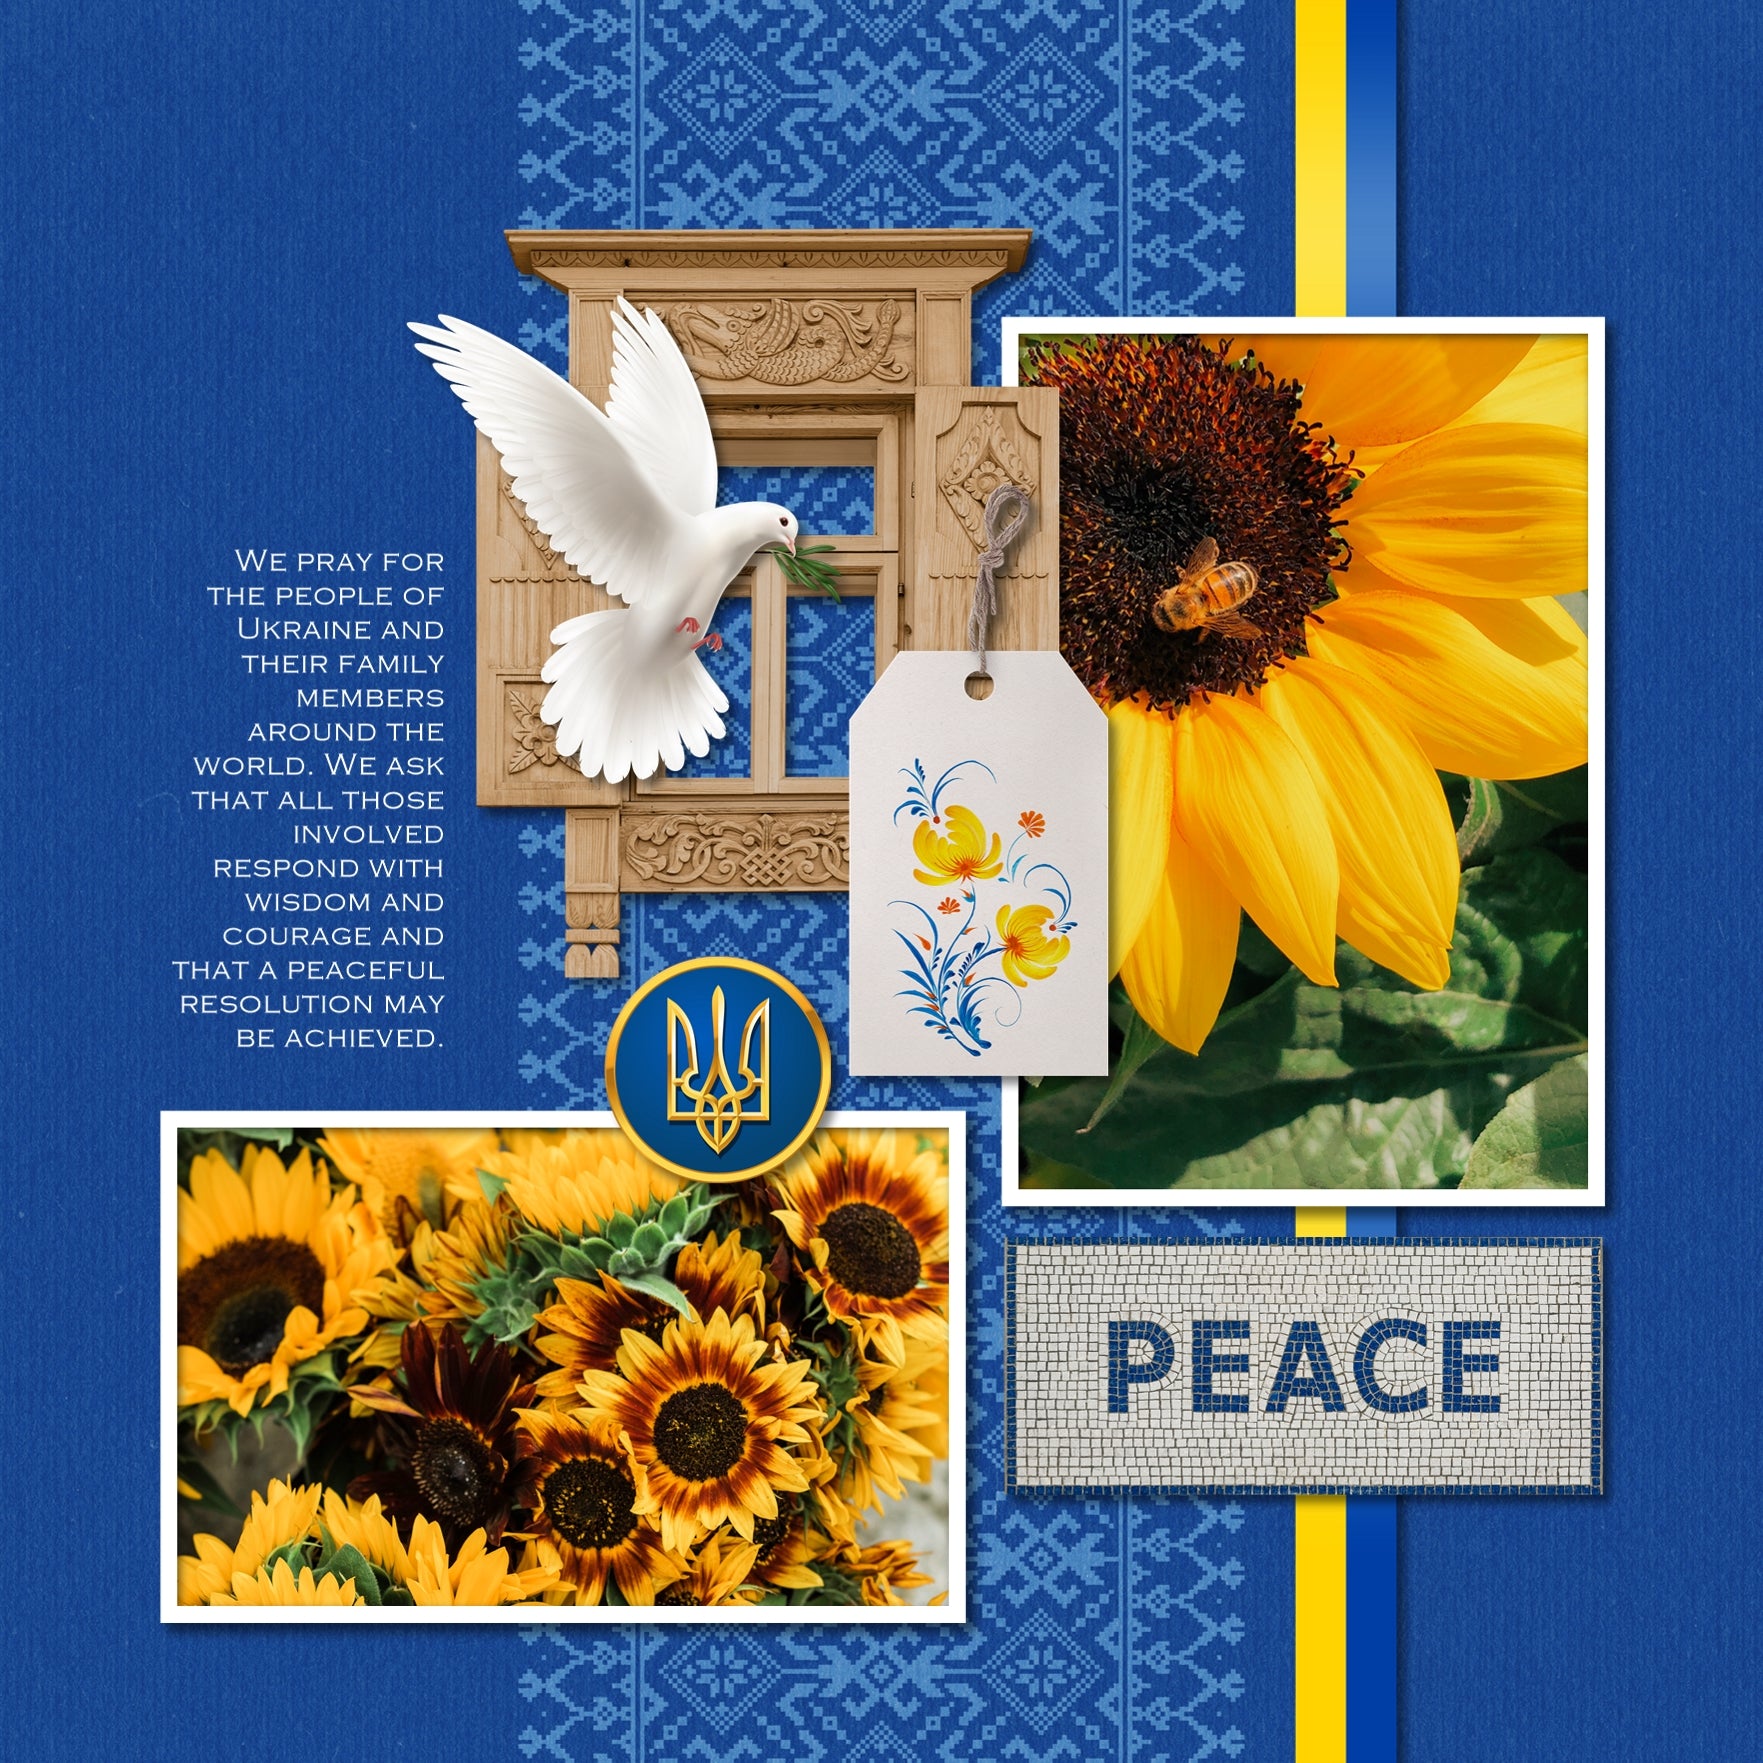 Show your support of Ukraine with this beautiful travel digital kit by Lucky Girl Creative filled with authentic Ukrainian papers and embellishments. Pray for Ukraine. Stand with Ukraine.